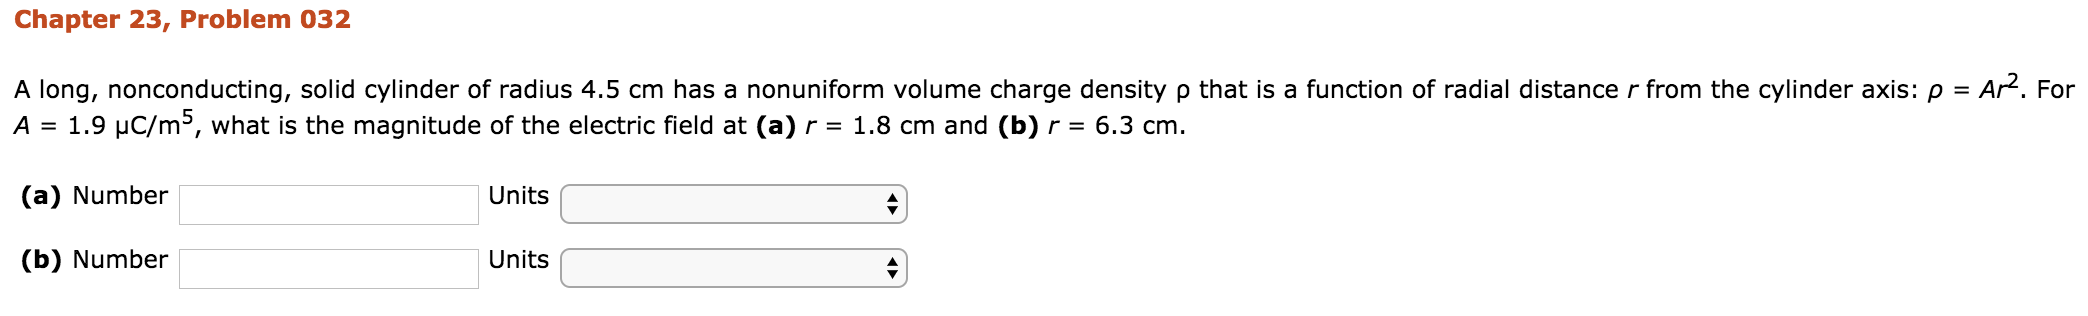 Chapter 23, Problem 032
that is a function of radial distance r from the cylinder axis: ρ = AP. For
A long, nonconducting, solid cylinder of radius 4.5 cm has a nonuniform volume charge density
A 1.9 uC/m5, what is the magnitude of the electric field at (a)r 1.8 cm and (b)r- 6.3 cm
(a) Number
(b) Number
Units
Units
